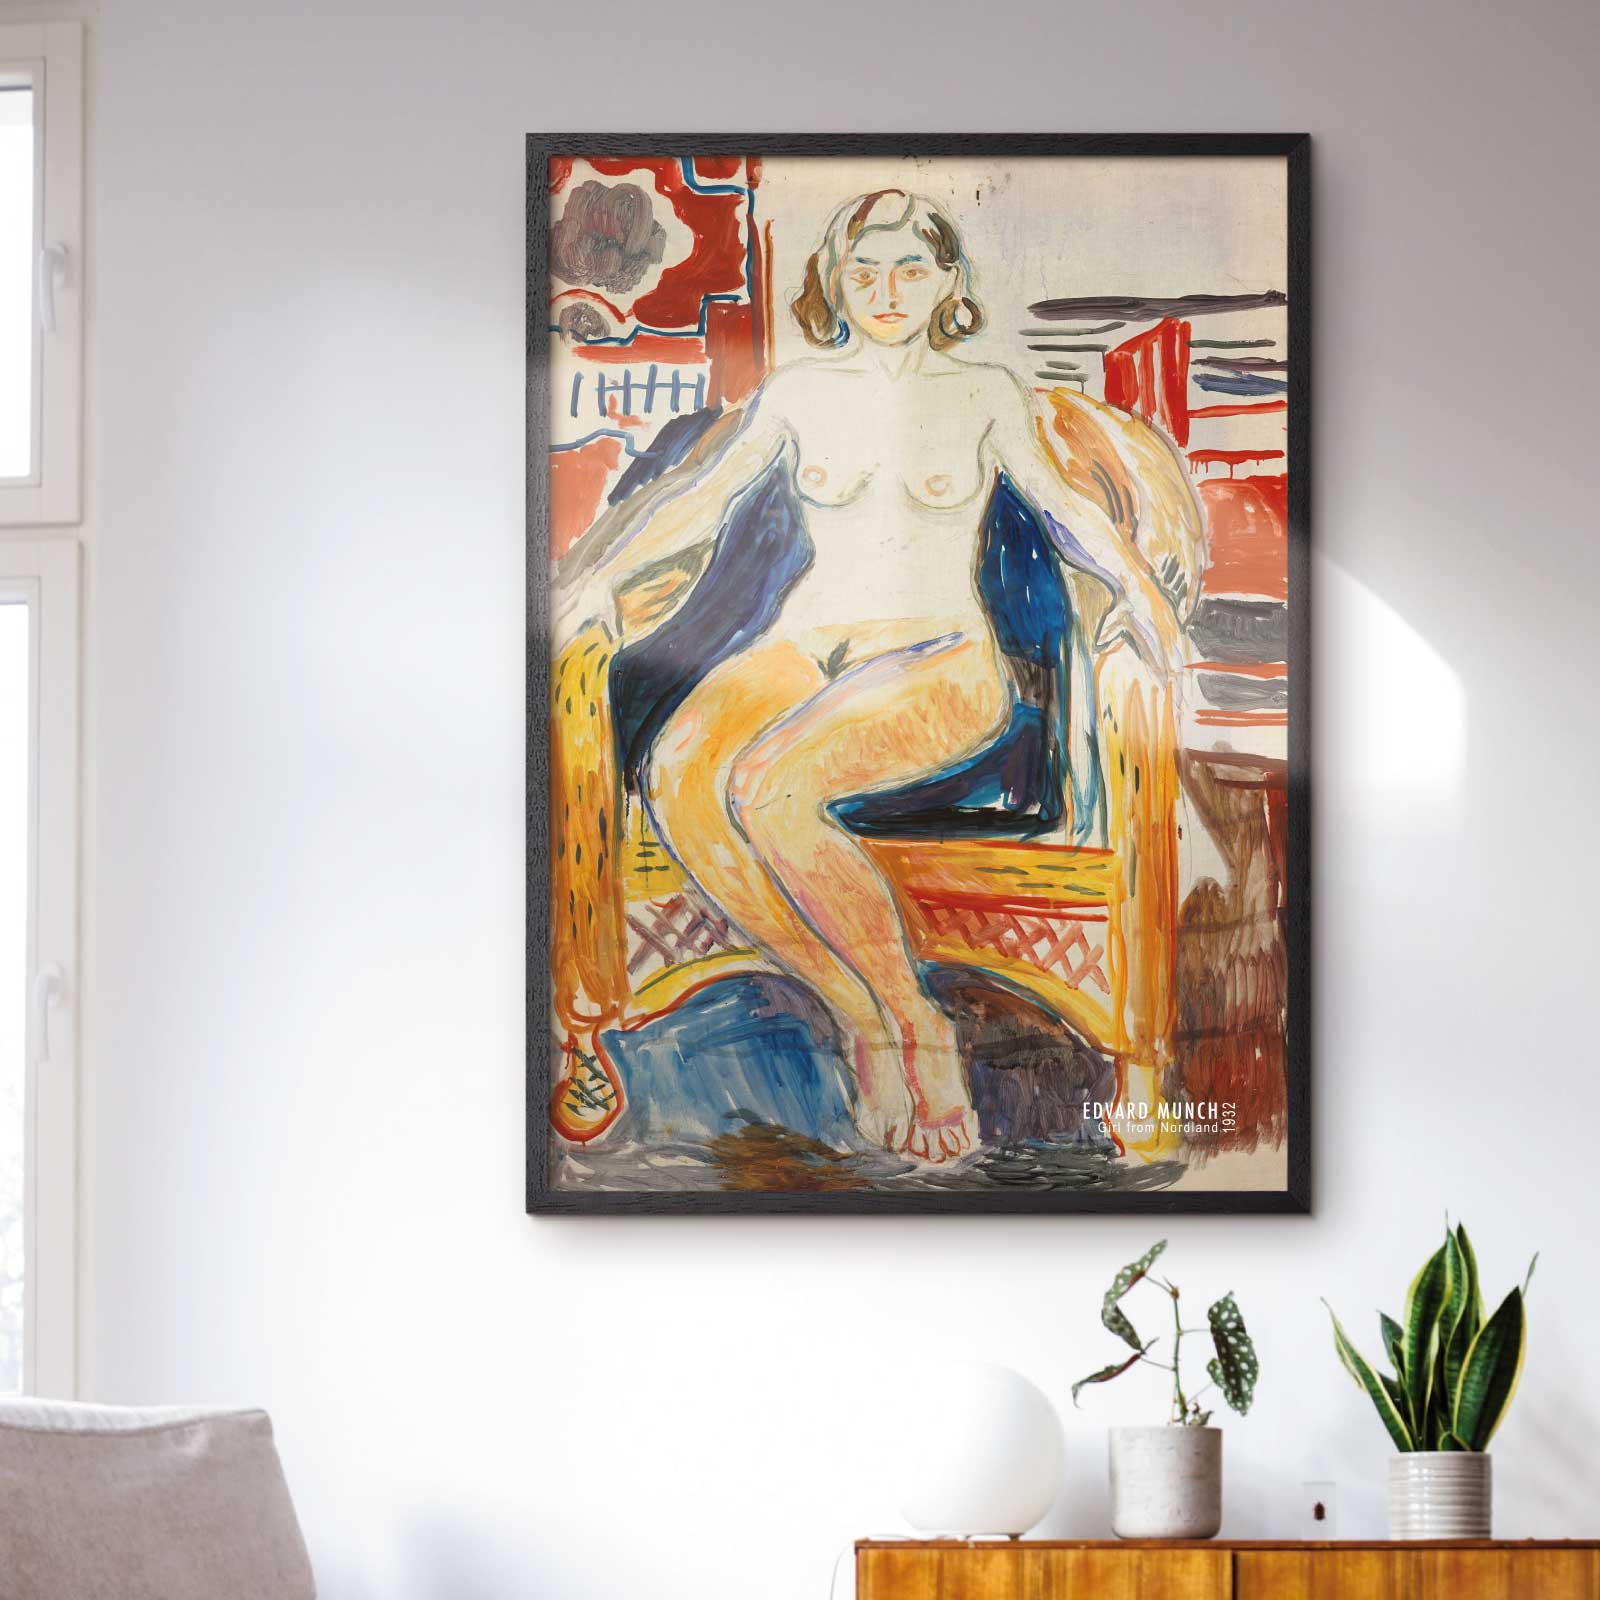 Art poster featuring  "Girl from Nordland" by Edvard Munch